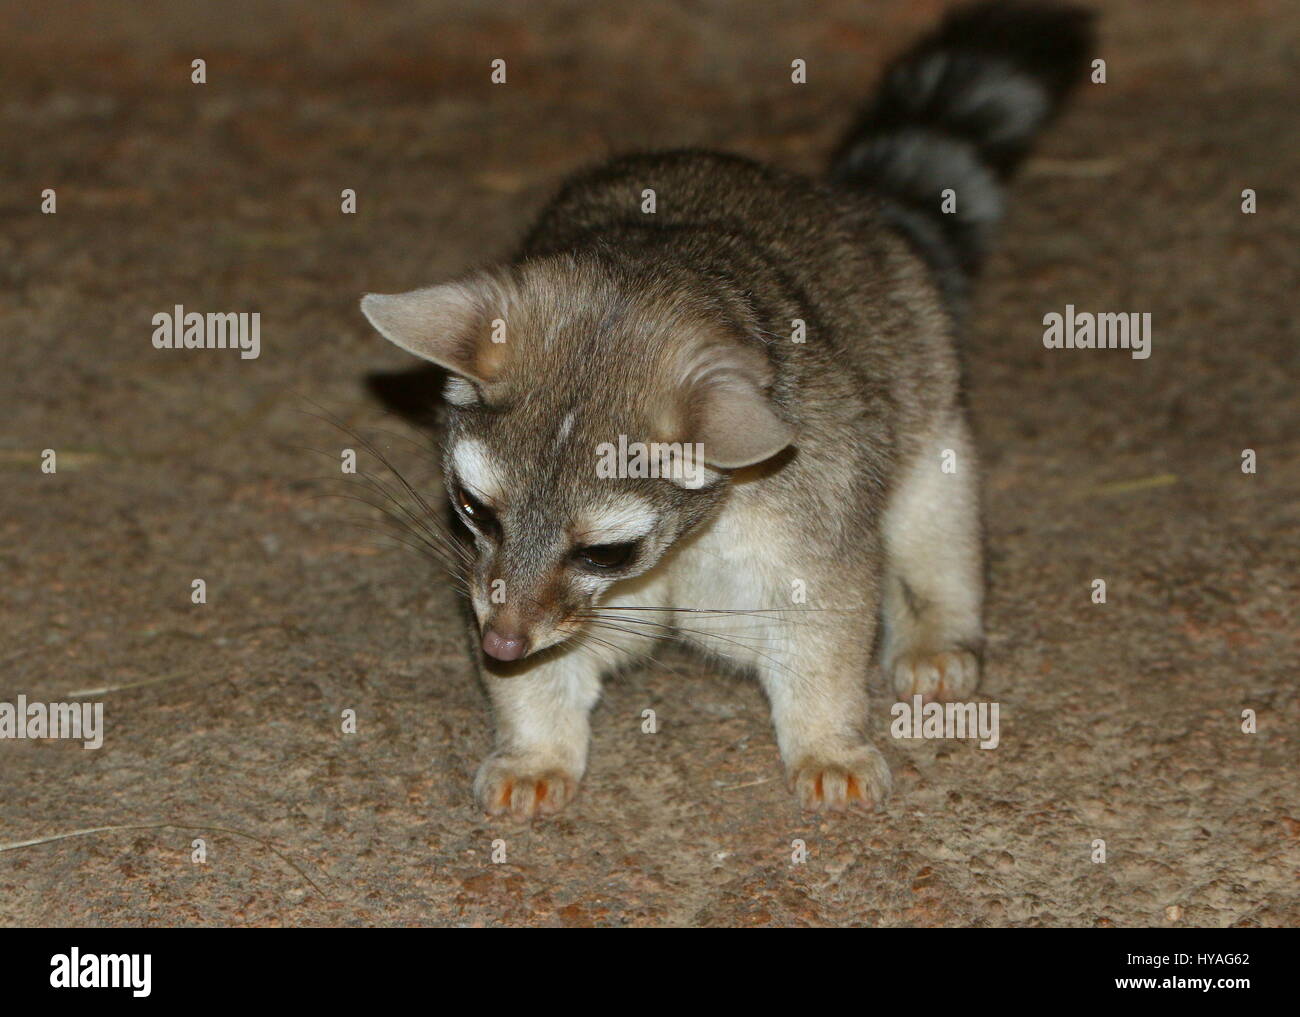 North American / Mexican Ring-tailed cat (Bassariscus astutus) on the prowl. Stock Photo